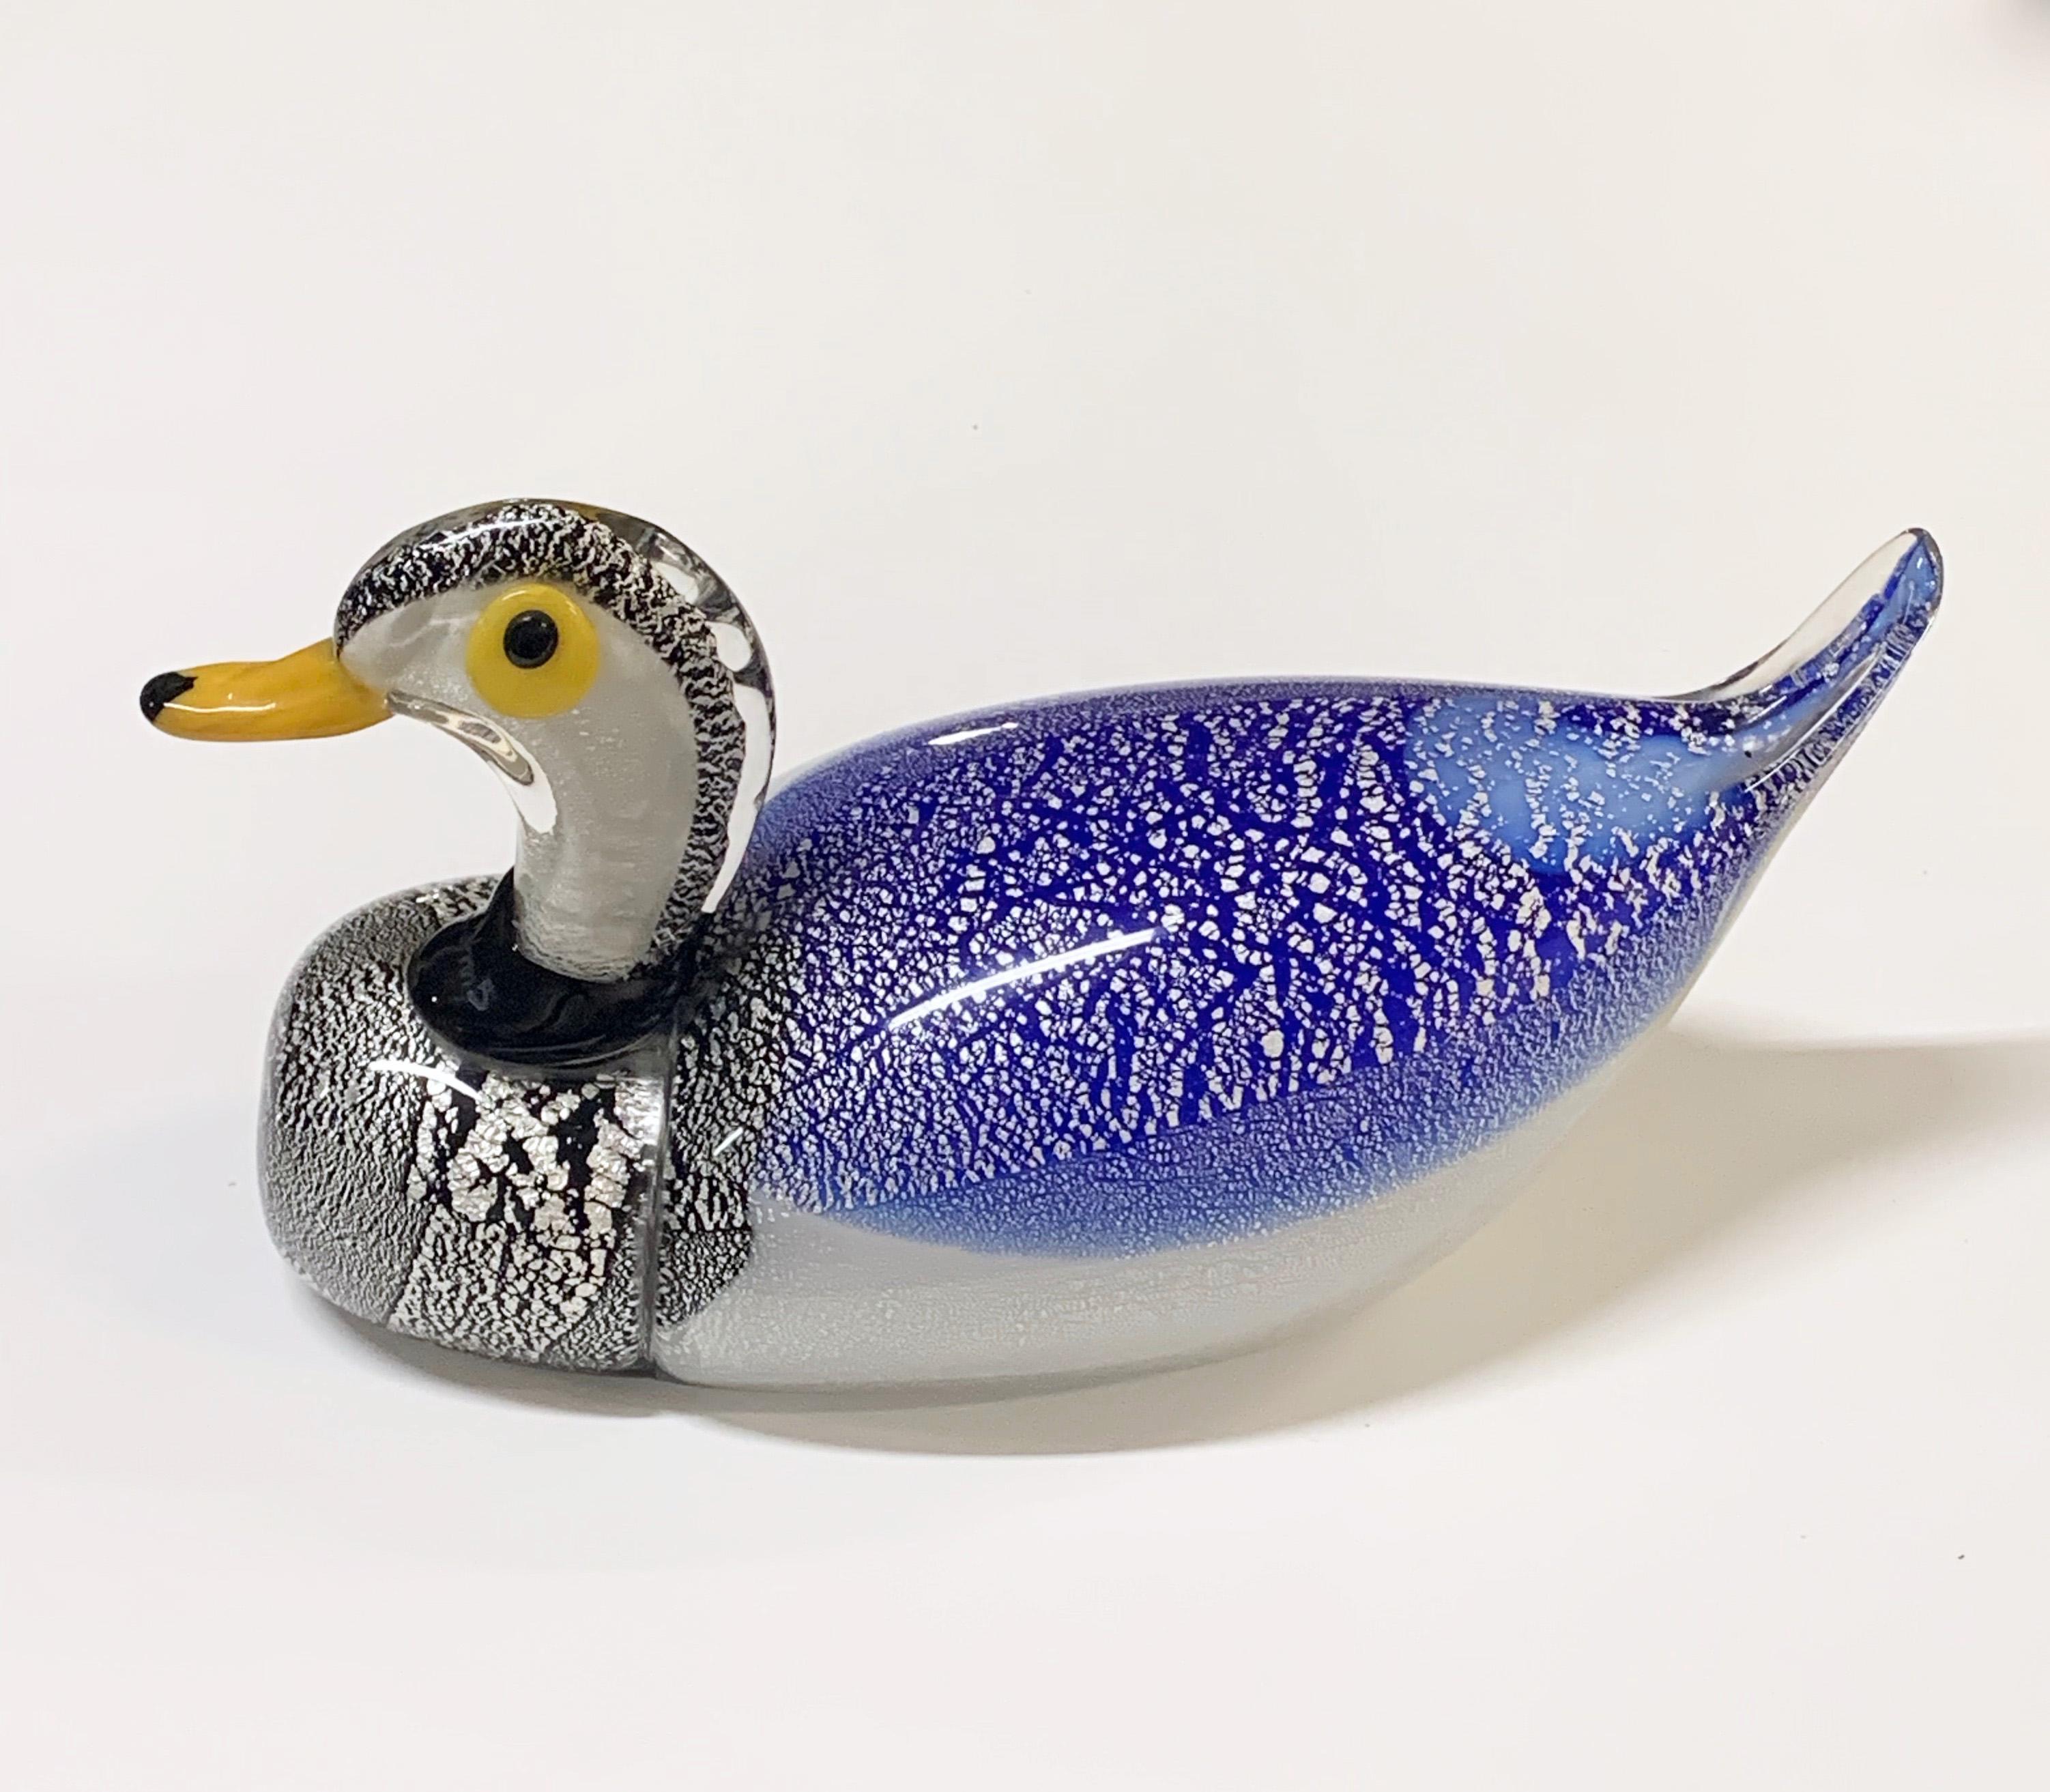 Large duck sculpture in artistic Murano glass with silver dots. This item was produced in Italy during the 1970s.

A Mid-Century Modern glass sculpture 